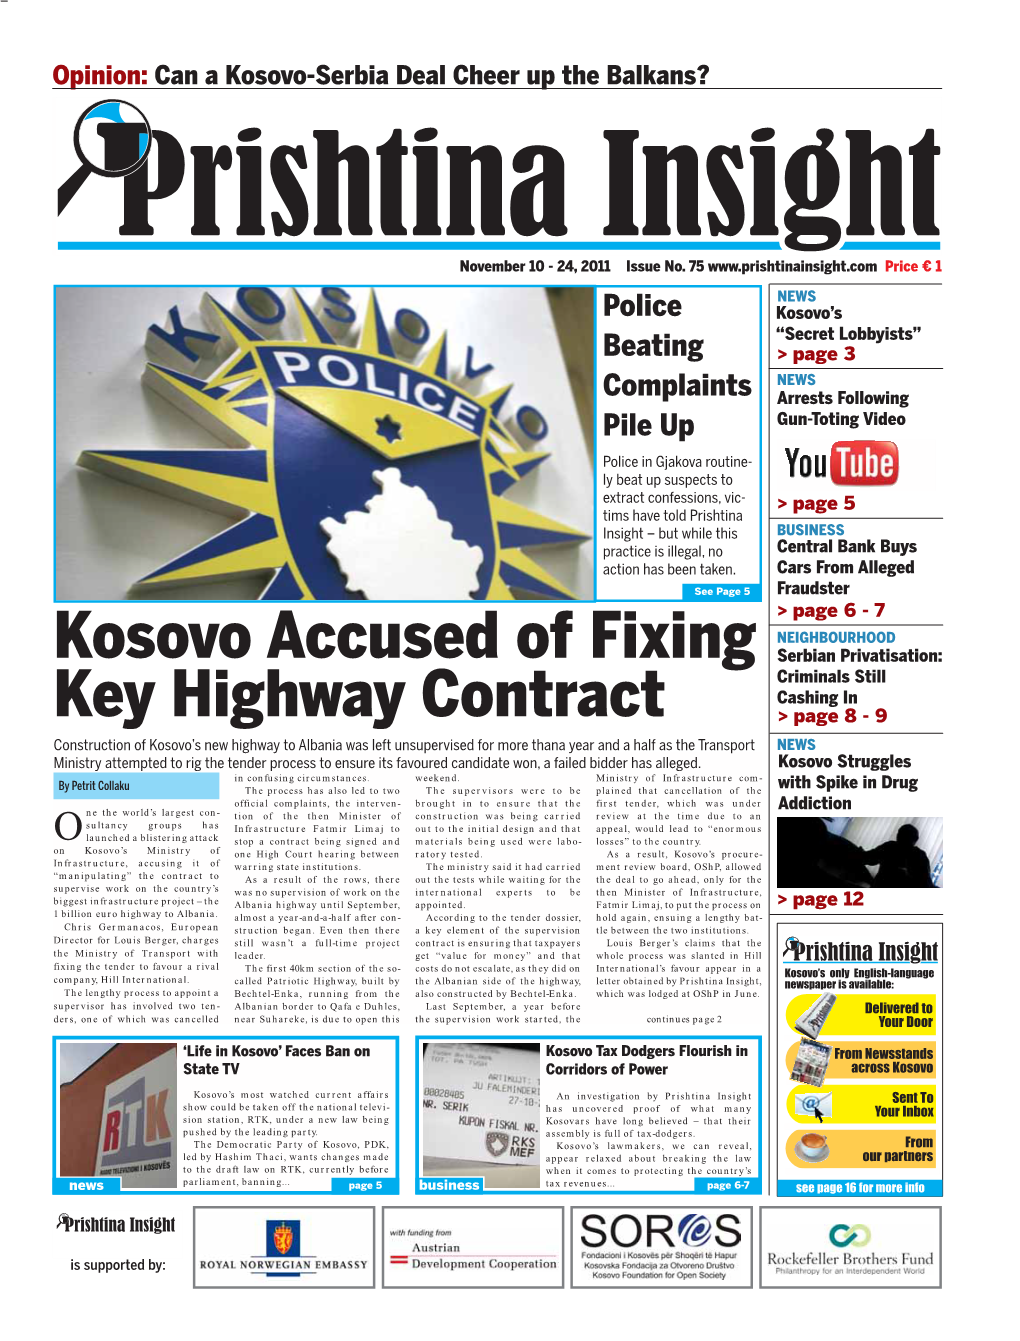 Kosovo Accused of Fixing Key Highway Contract from Page 1 Ments and Was Backed by the Oshp